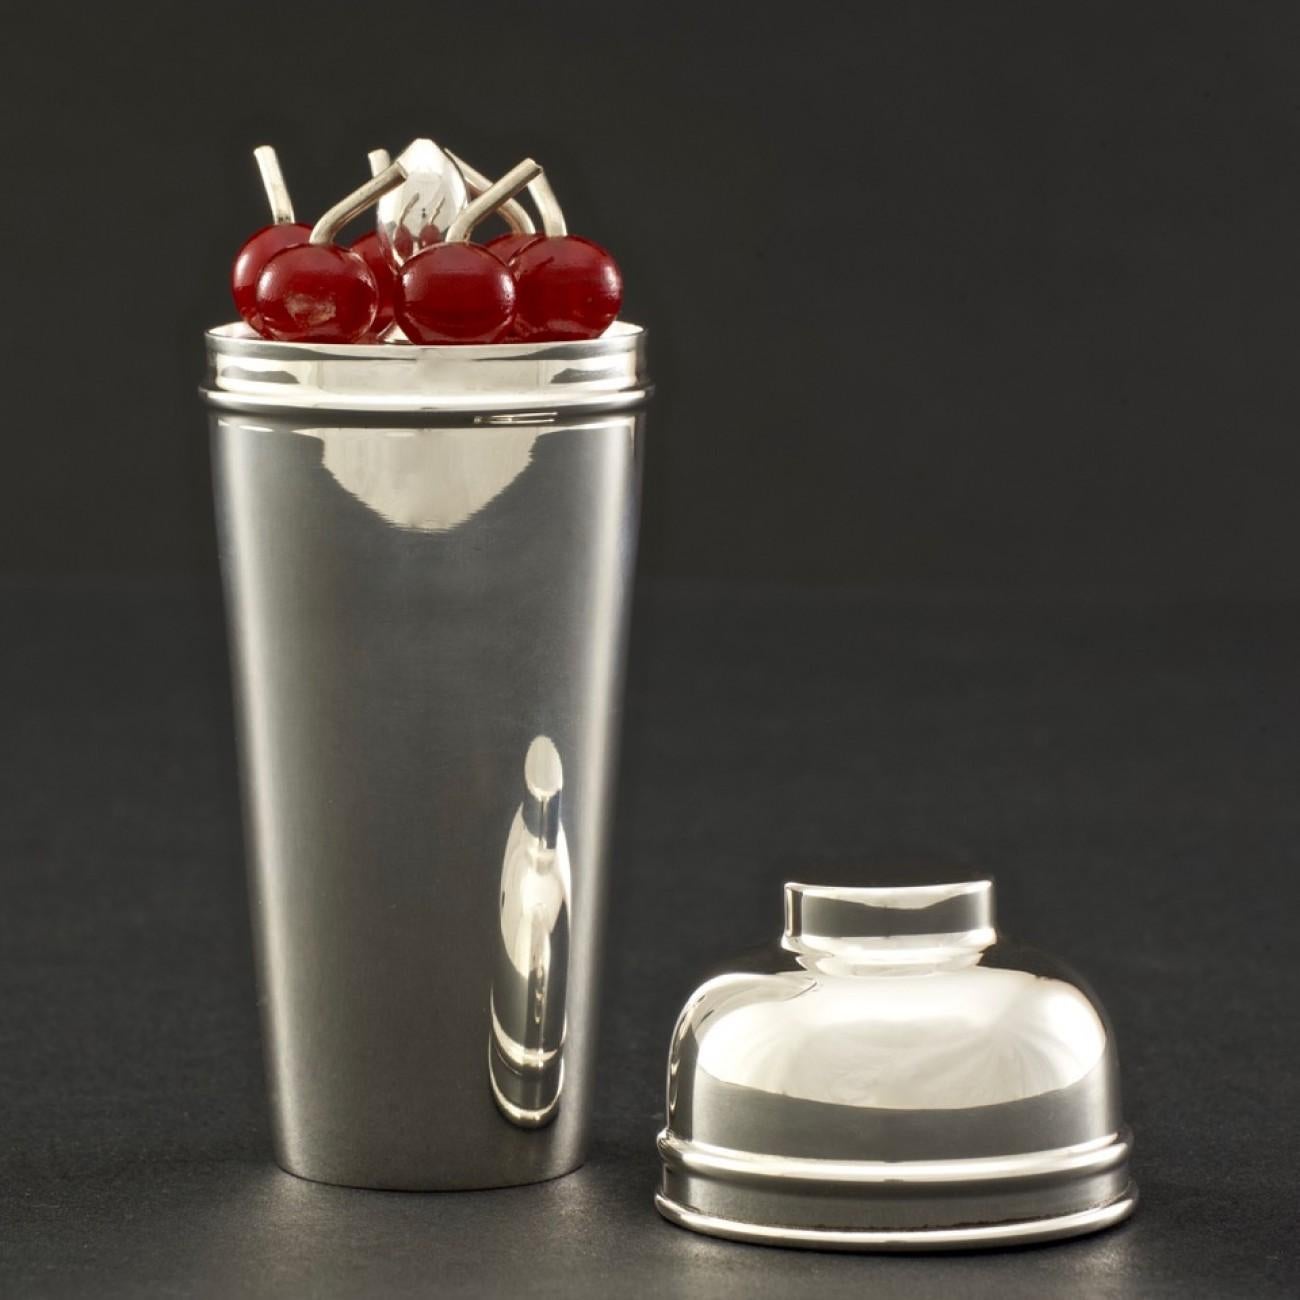 British Cocktail Cherry Sticks in a Silver Plated Miniature Cocktail Shaker, circa 1935